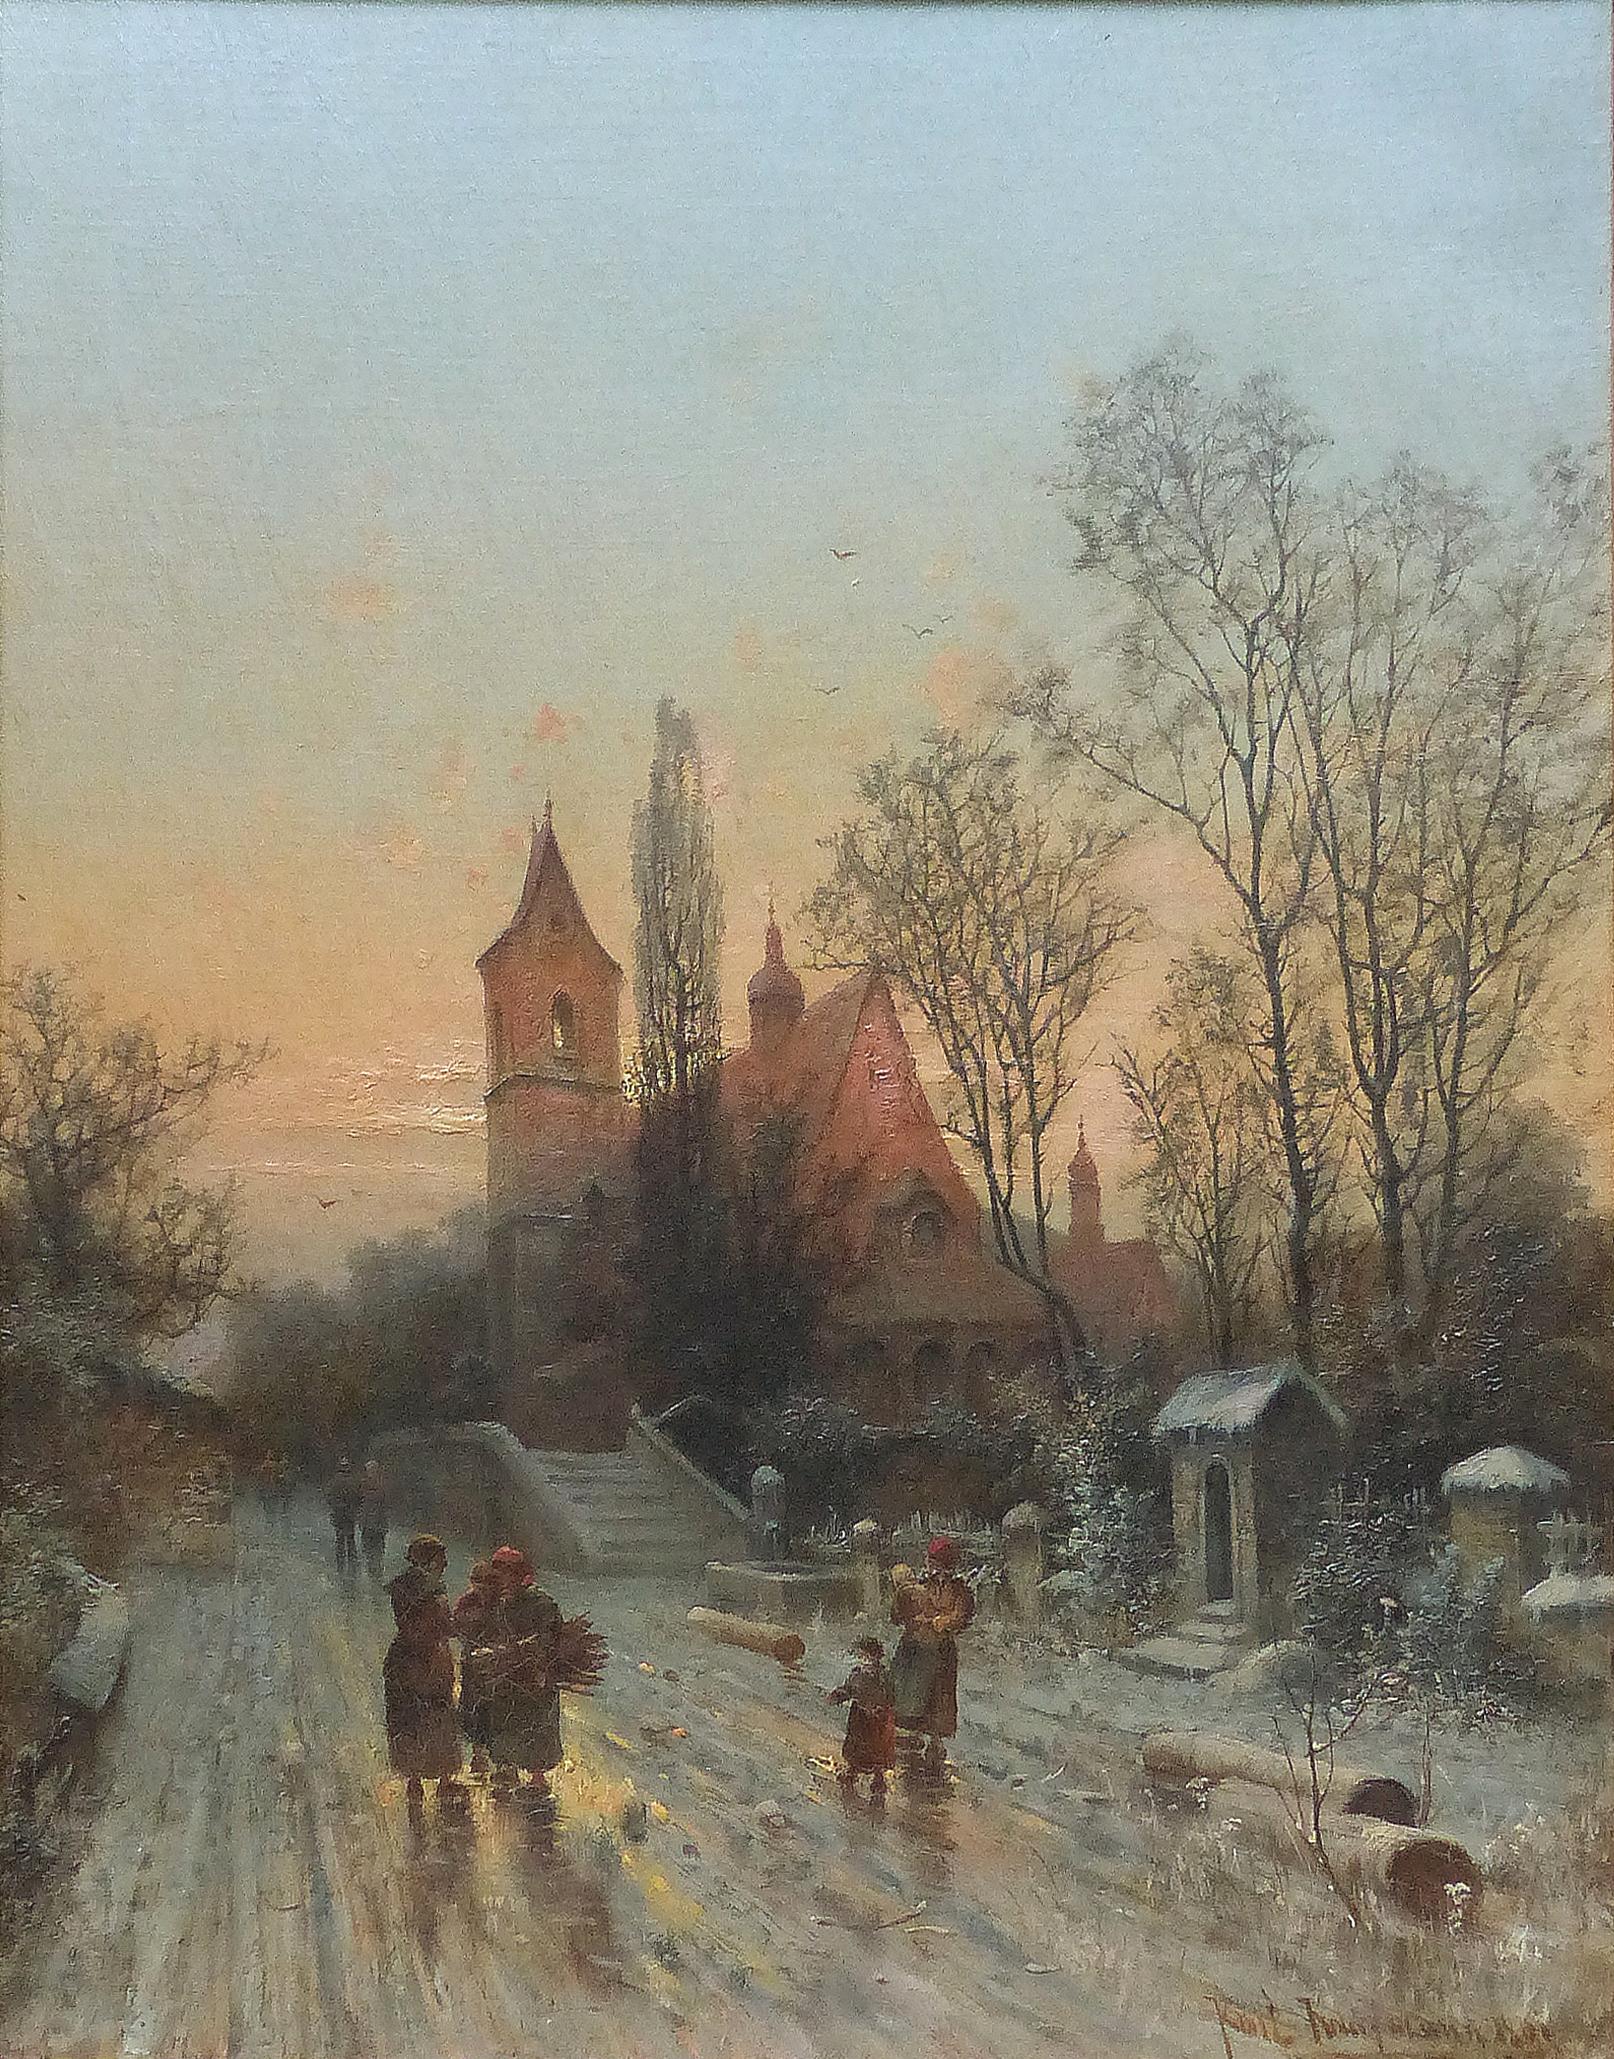 Karl Kaufmann 1899 Oil Painting of a European Village Landscape 

Offered for sale is a delicately painted oil on canvas of a European village scene by the listed artist Karl Kaufmann (1843 in Neuplachowitz- 1905 in Vienna). Kaufman was an Austrian